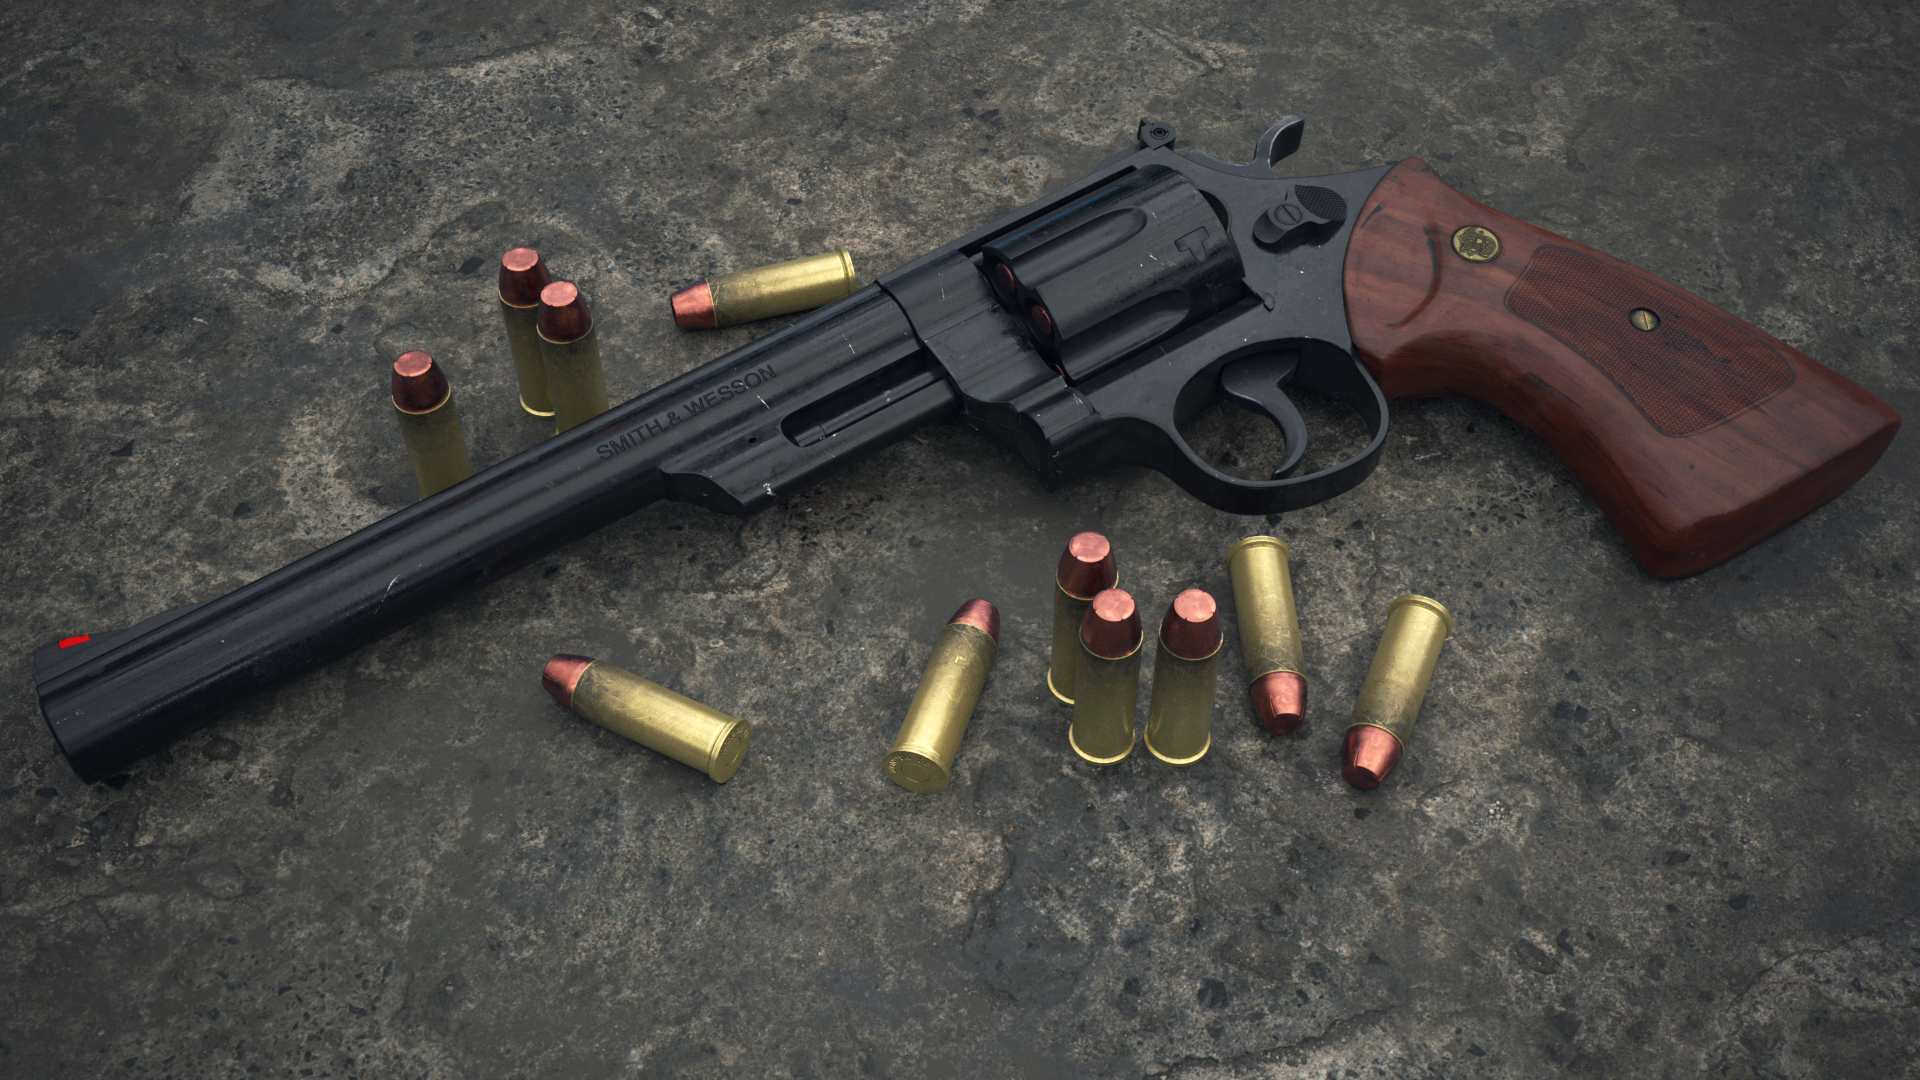 Smith & Wesson 29 .44 Magnum (Dirty Harry's gun) - Finished Projects -  Blender Artists Community